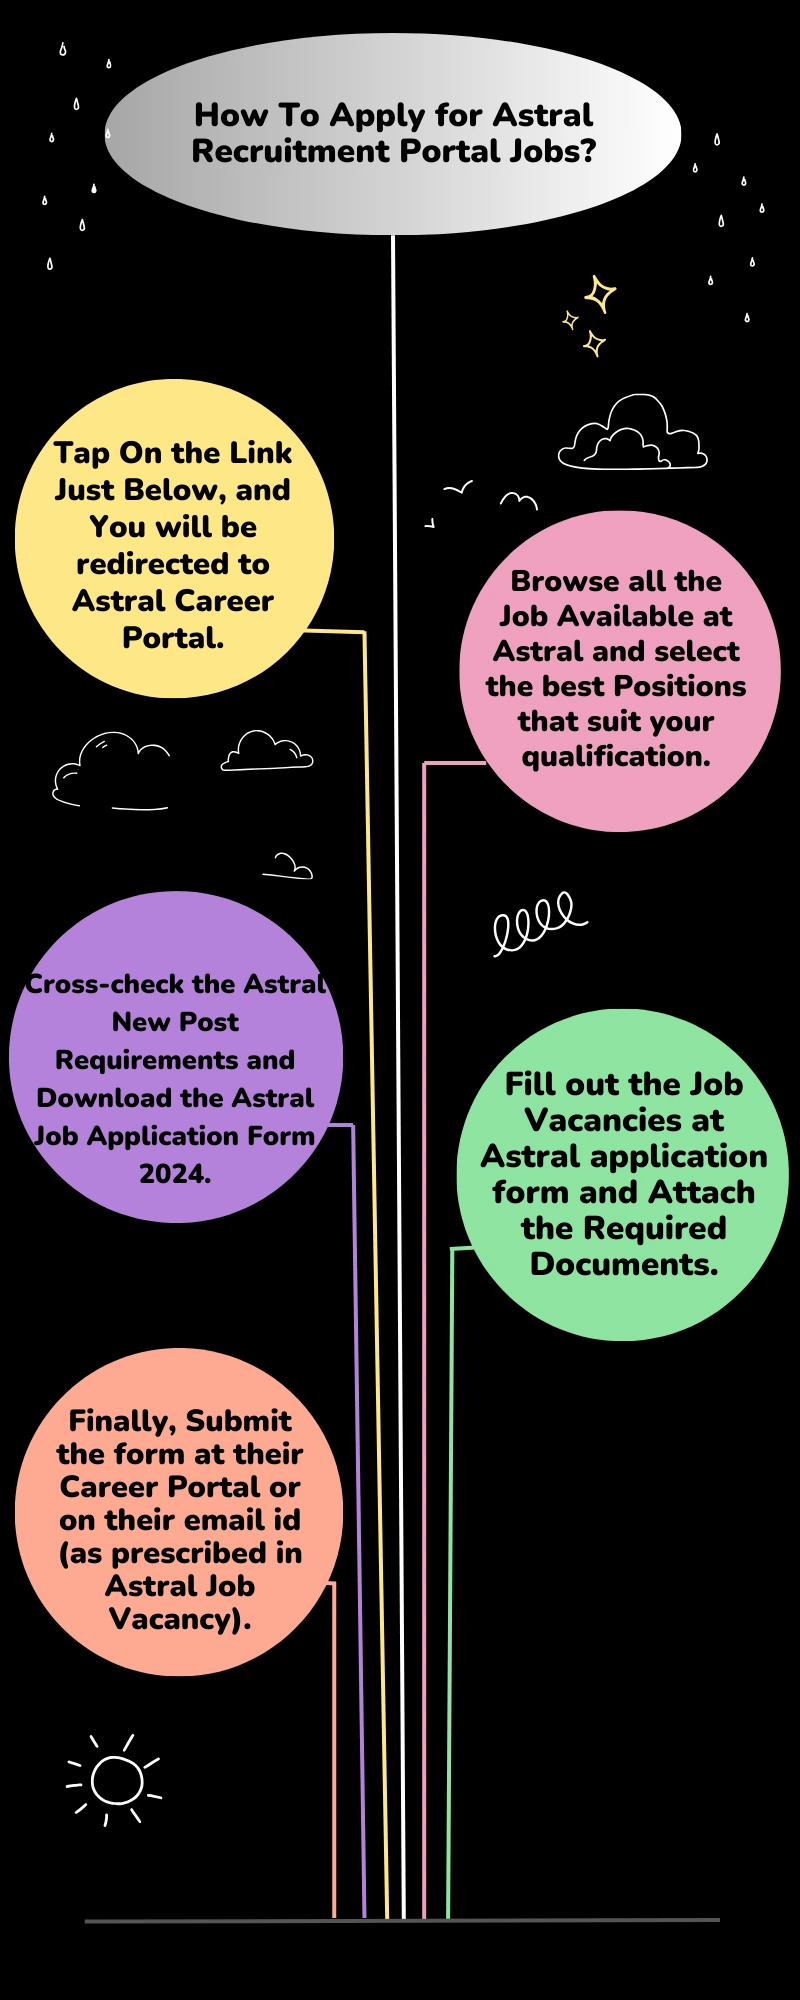 How To Apply for Astral Recruitment Portal Jobs?